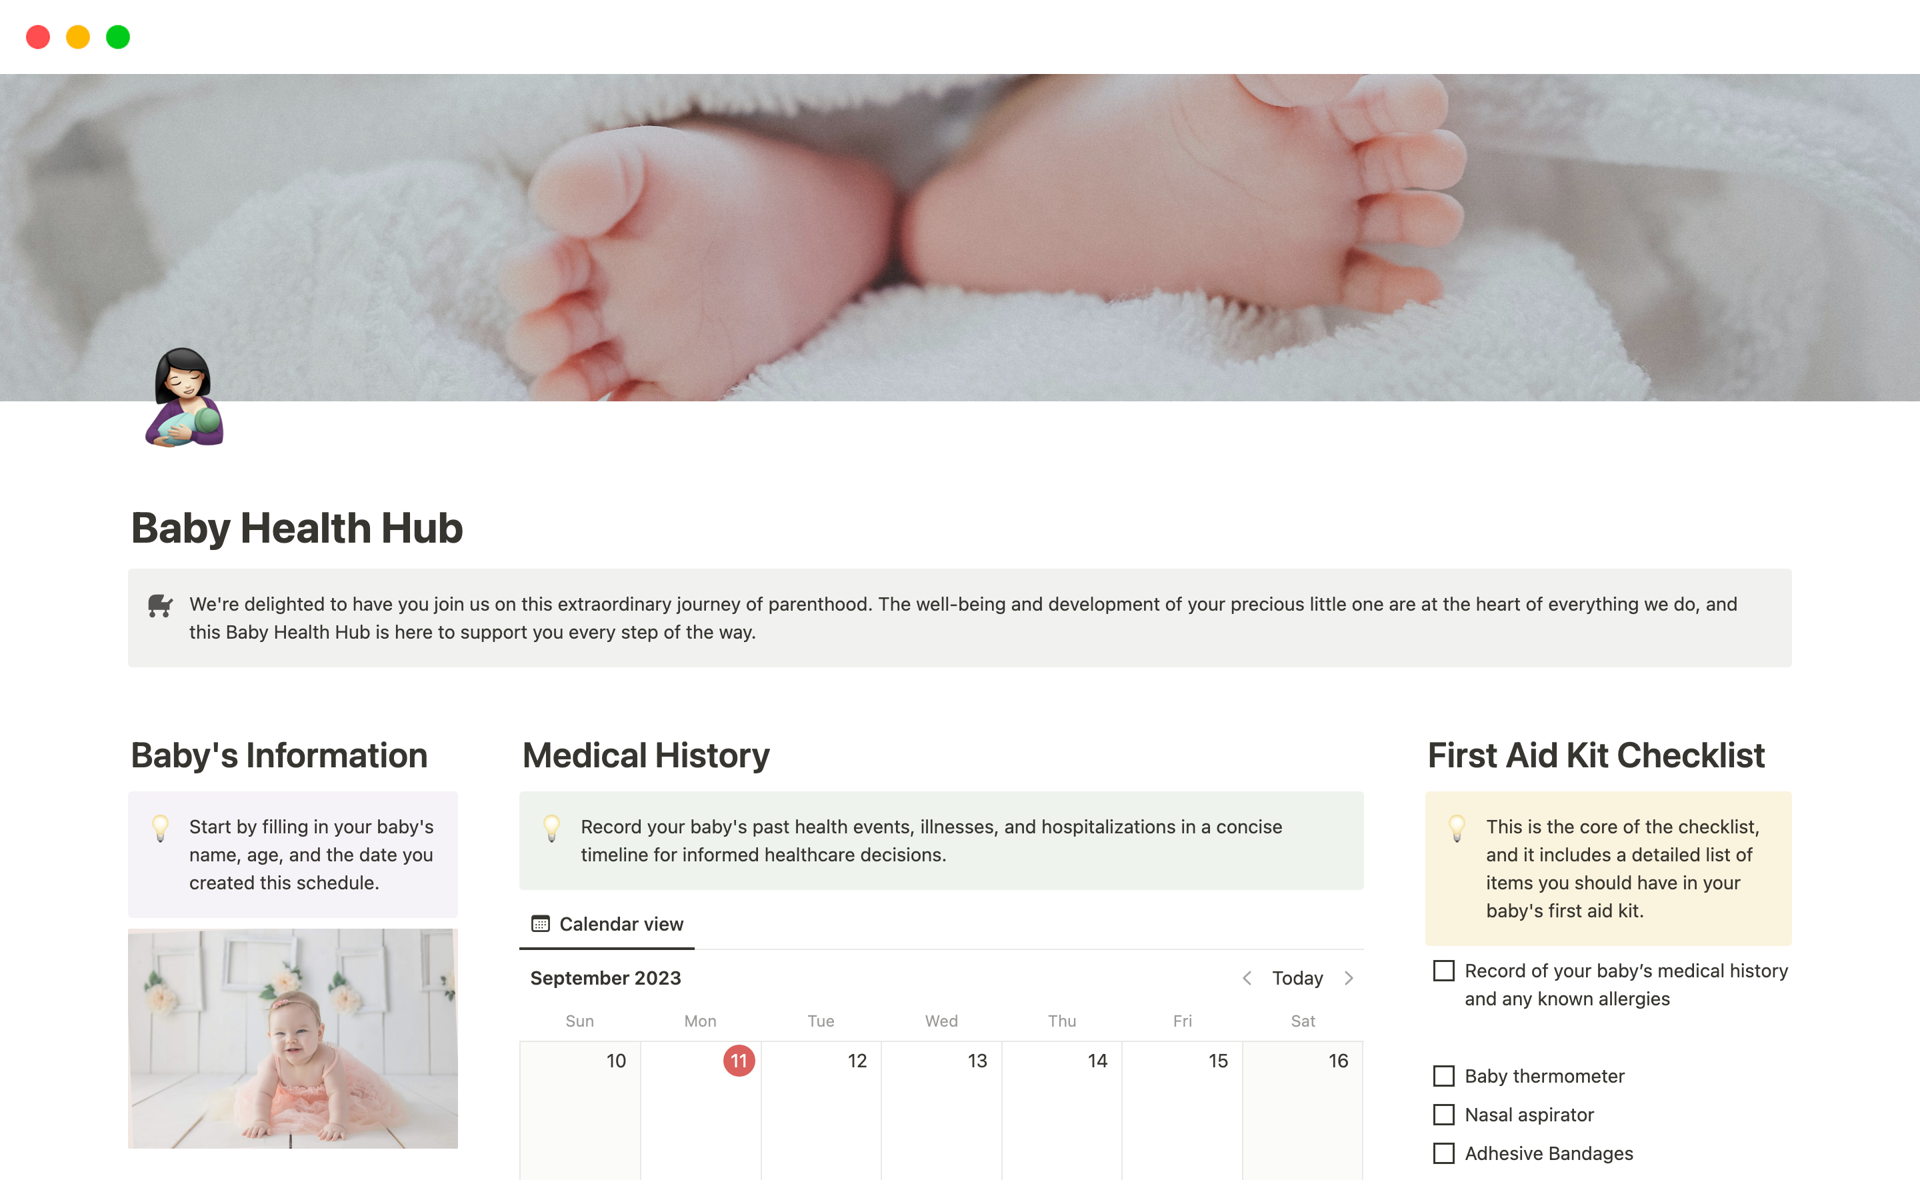 This comprehensive tracker empowers you to take charge of your baby's care and development, from tracking vaccinations to medical records and so much more.